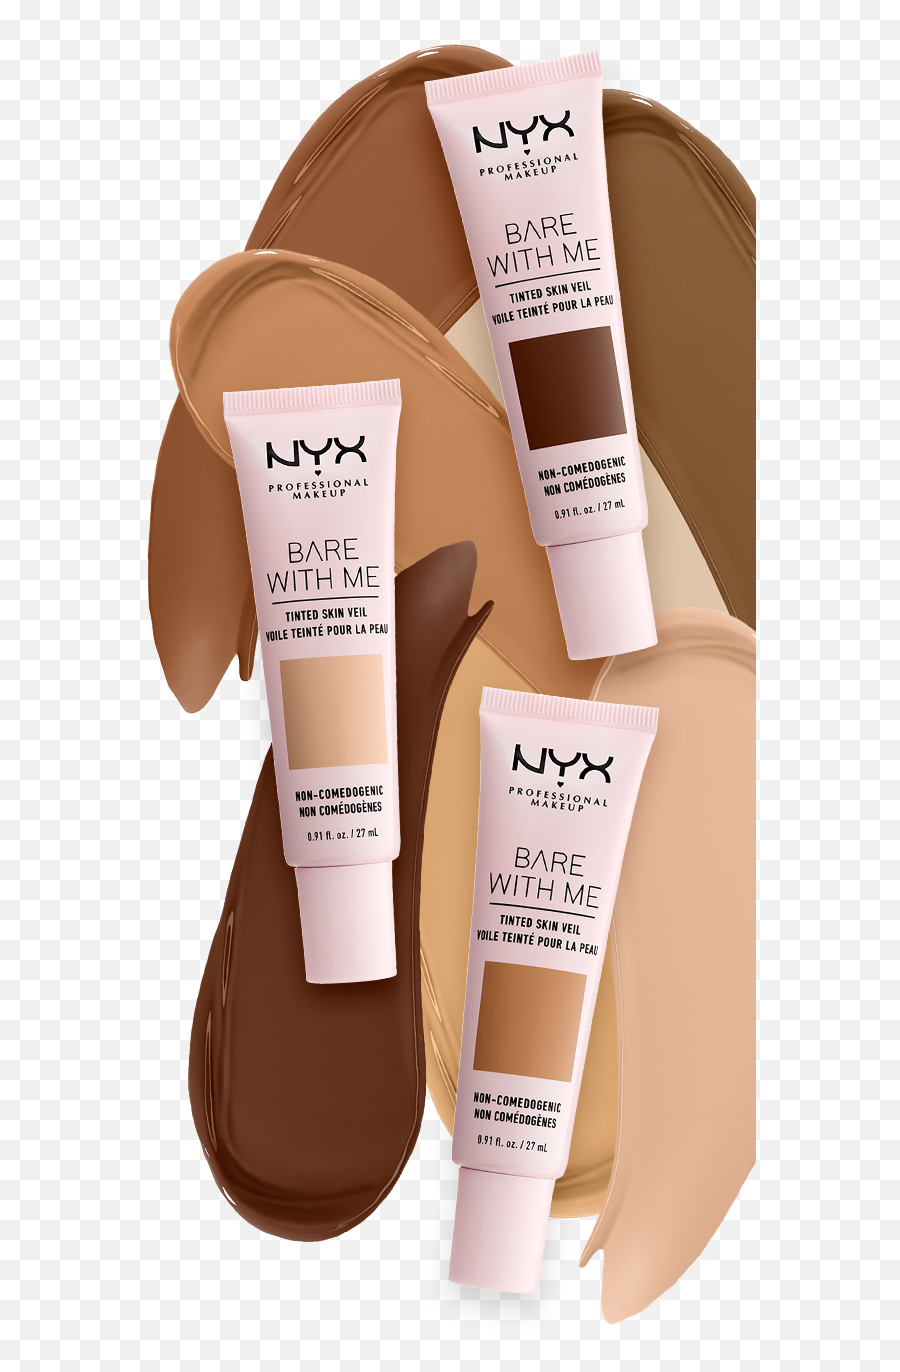 Nyx Professional Makeup Bare With Me - Lotion Emoji,Nyx Emotion Swatch